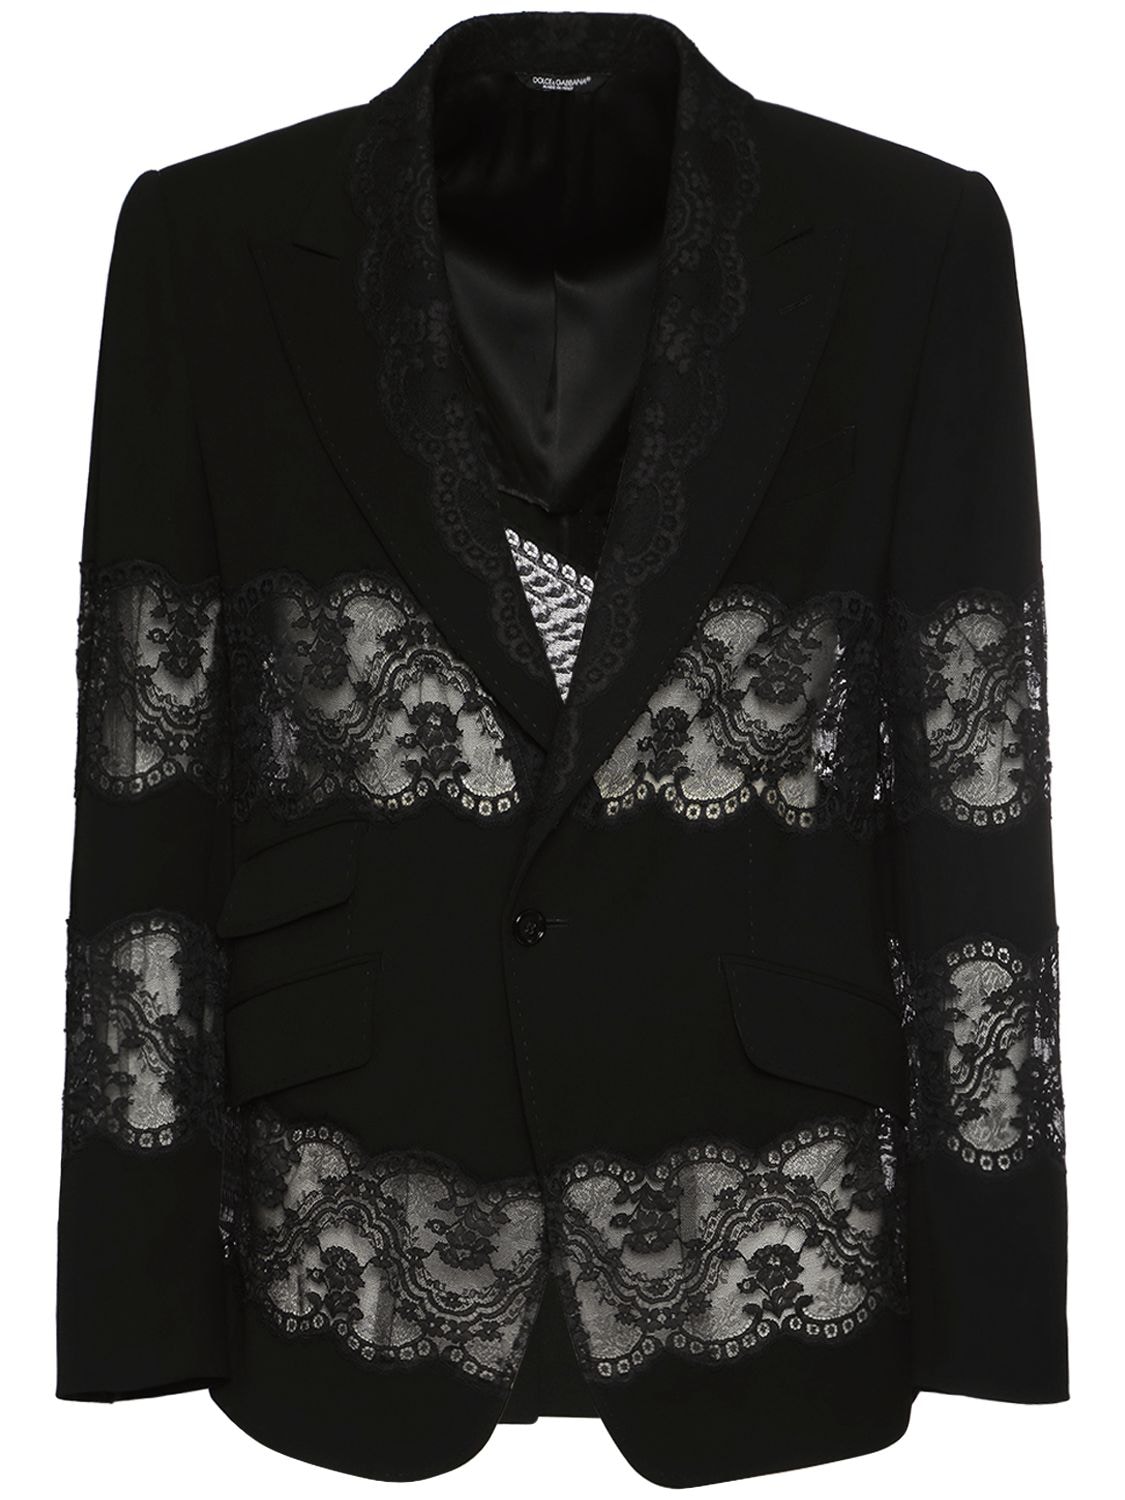 Single Breasted Wool & Lace Jacket